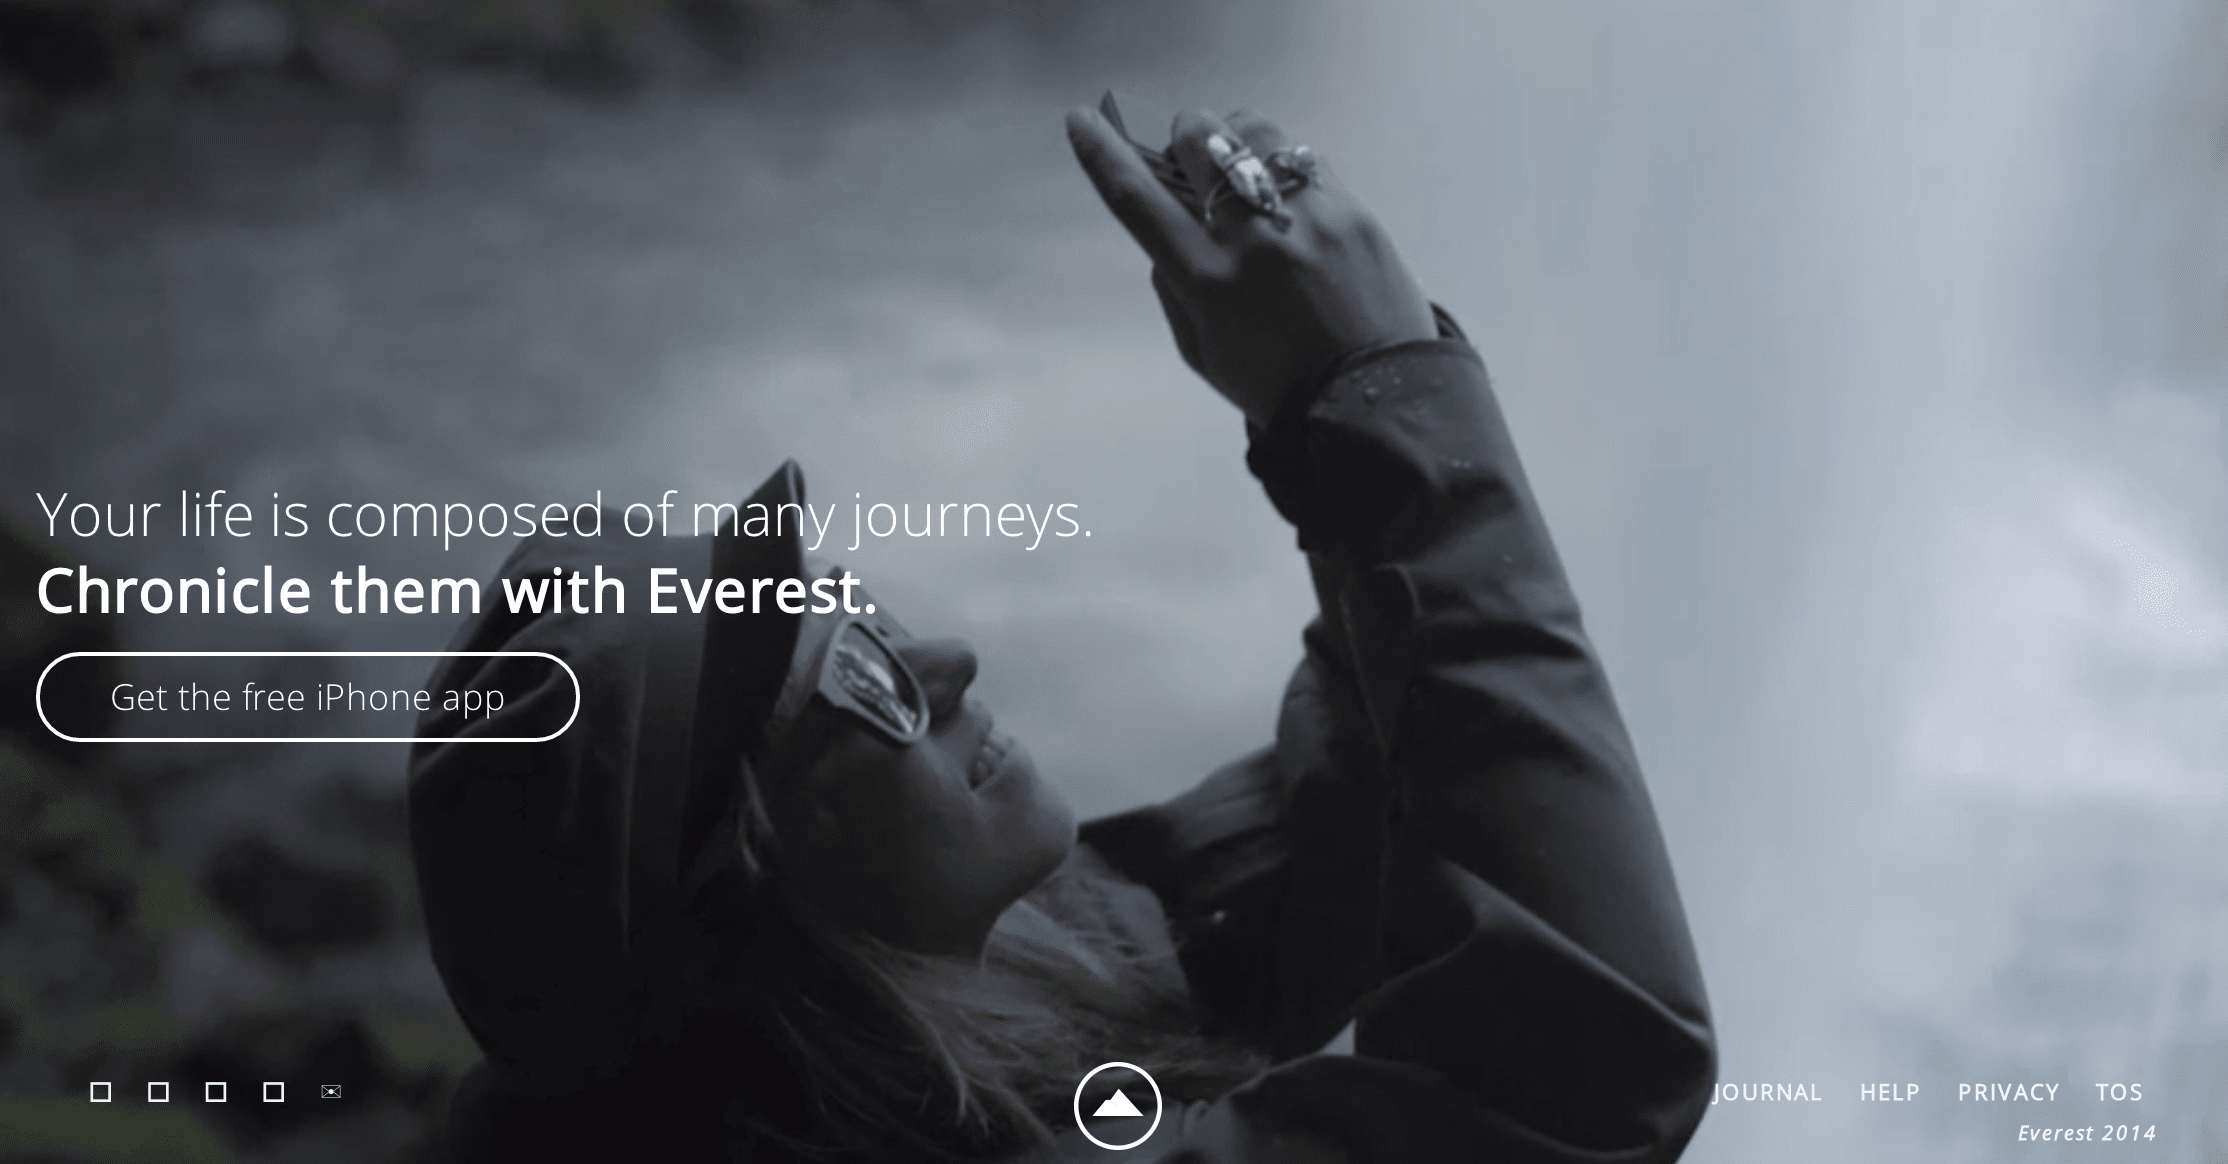 Everest lets you tell stories about specific moments of your journeys.